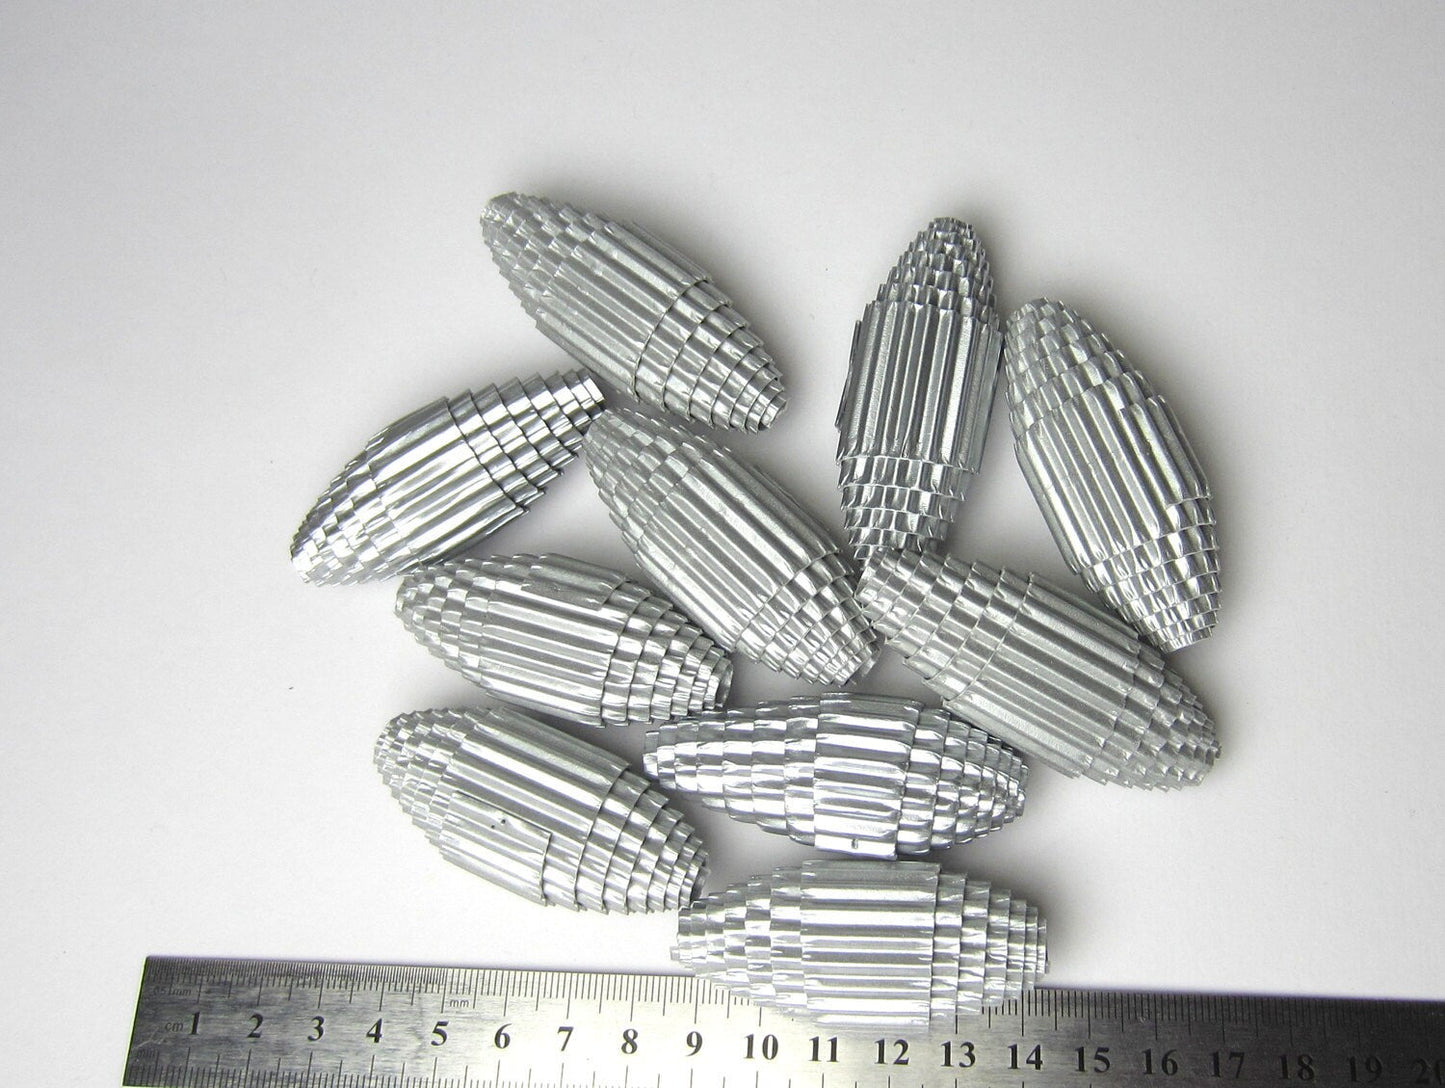 Golden Paper Beads made of corrugated cardboard - unfinished